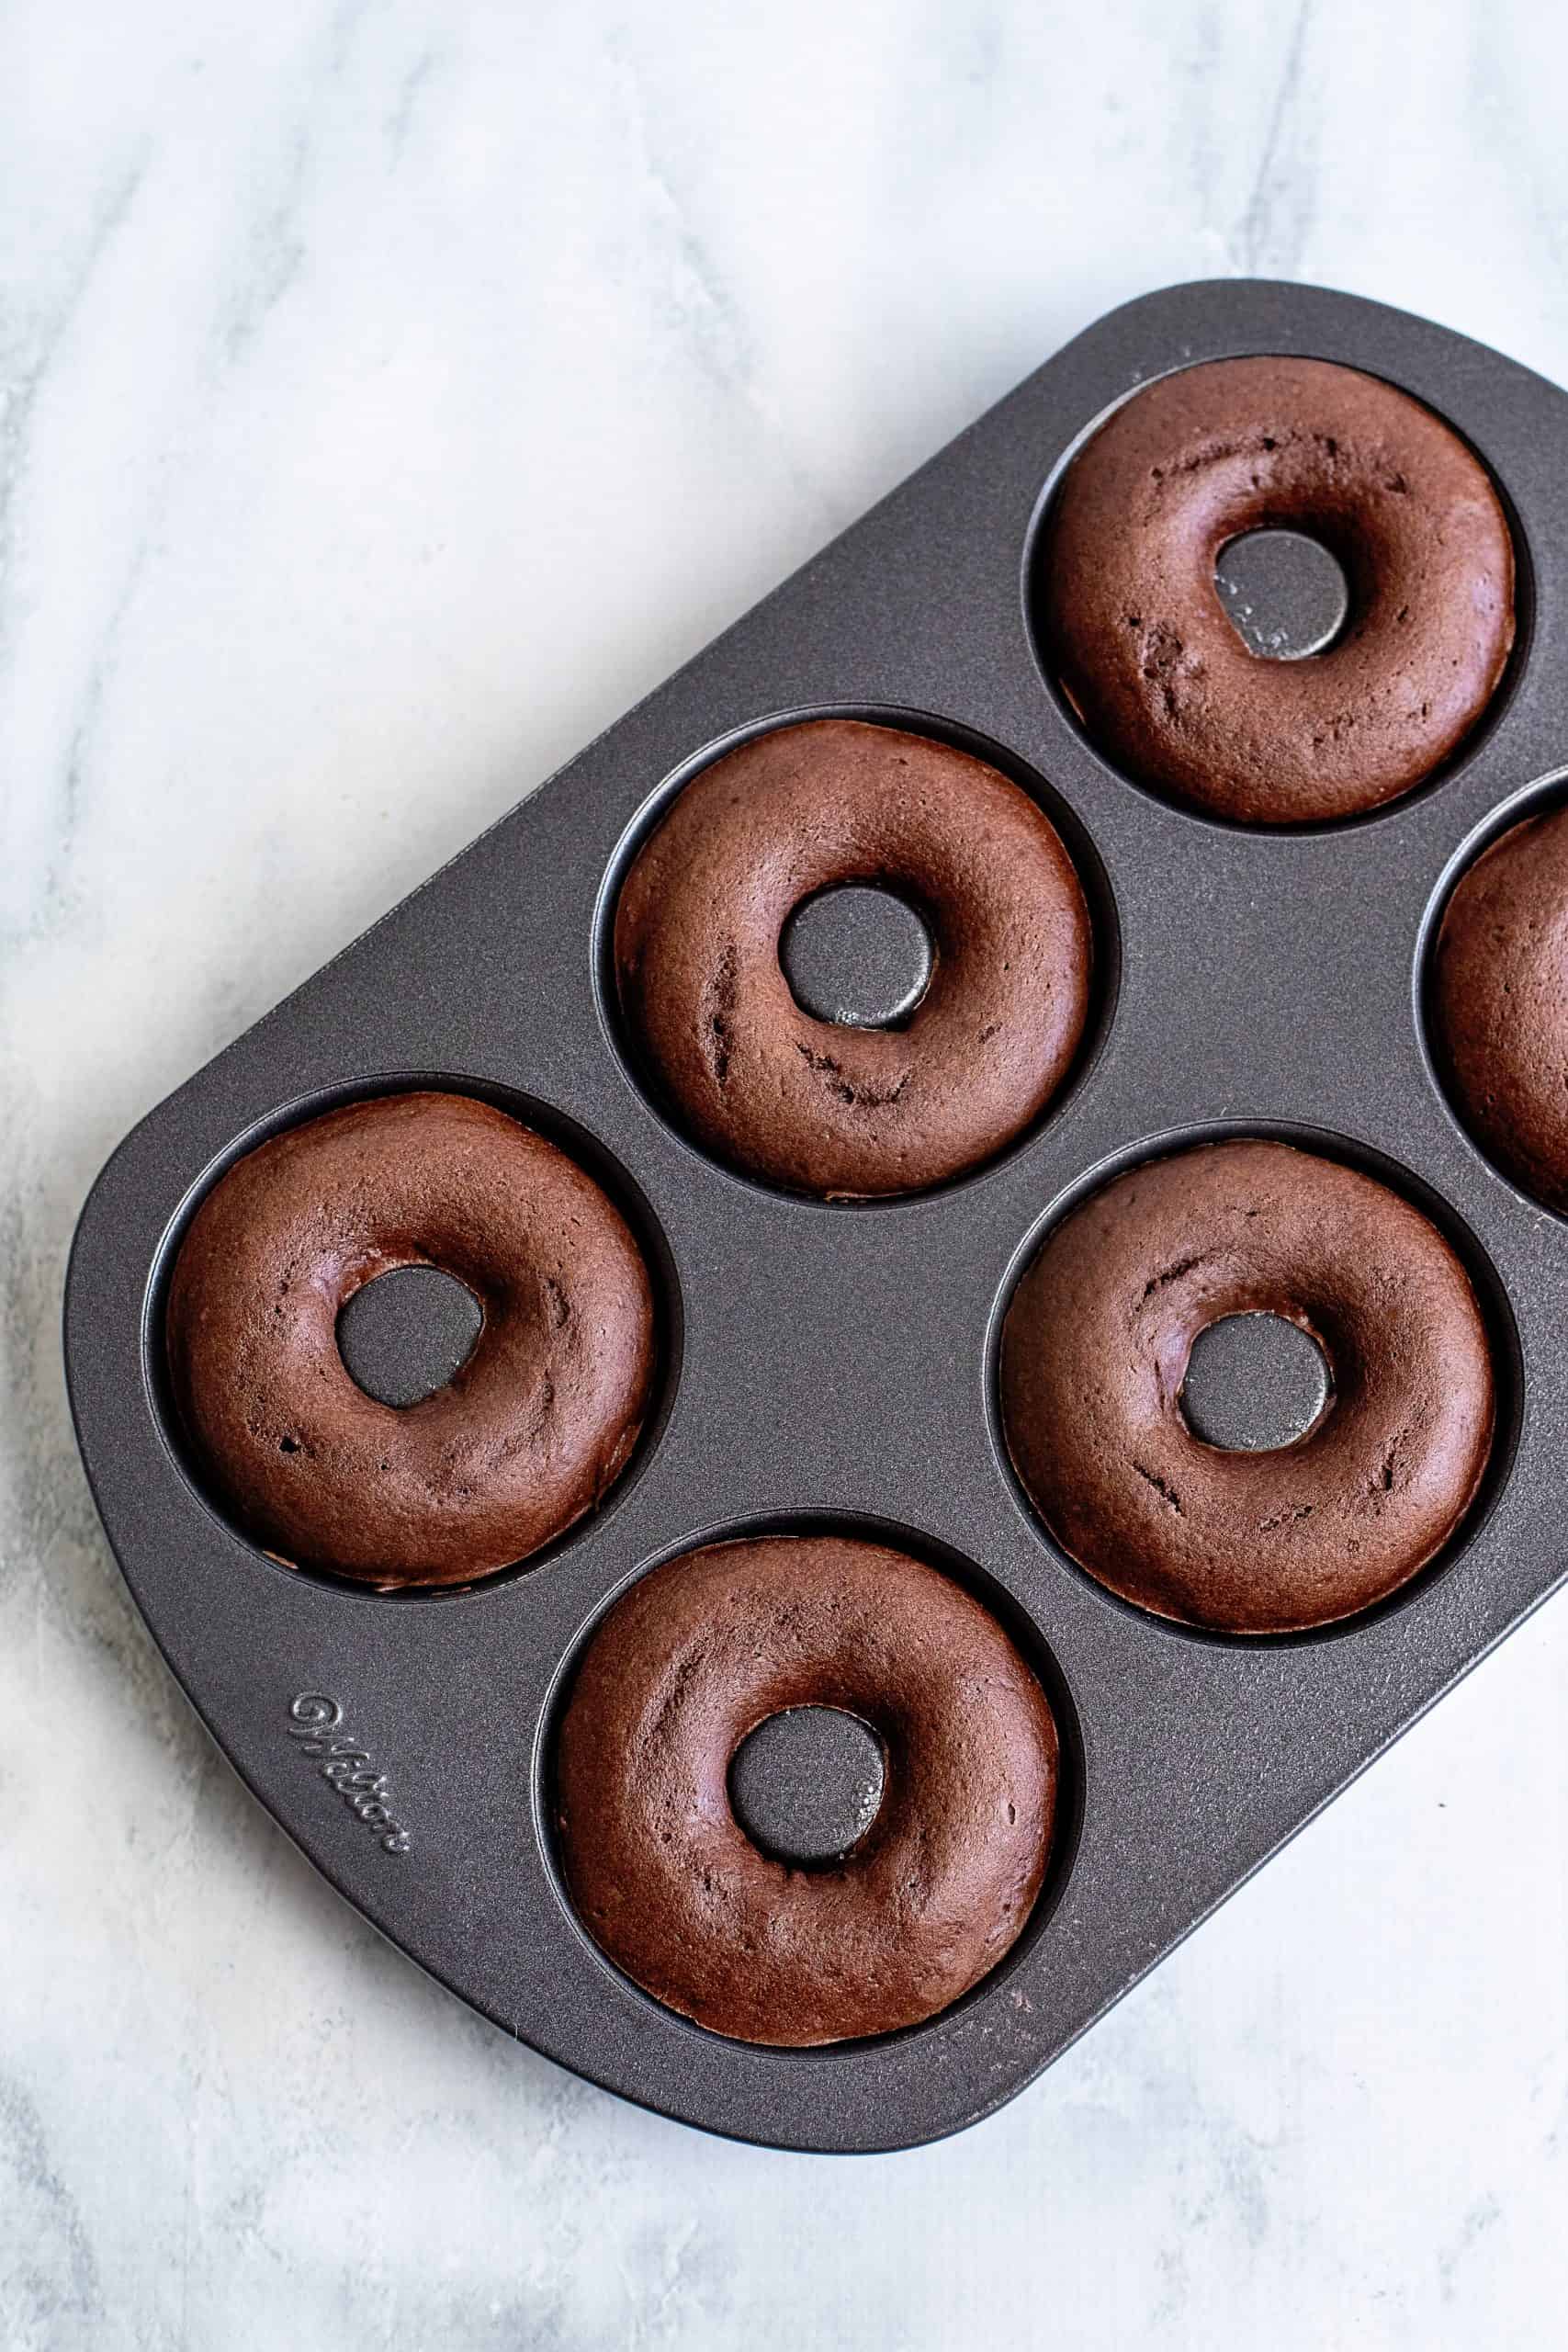 Baked donuts in donut pan overhead image